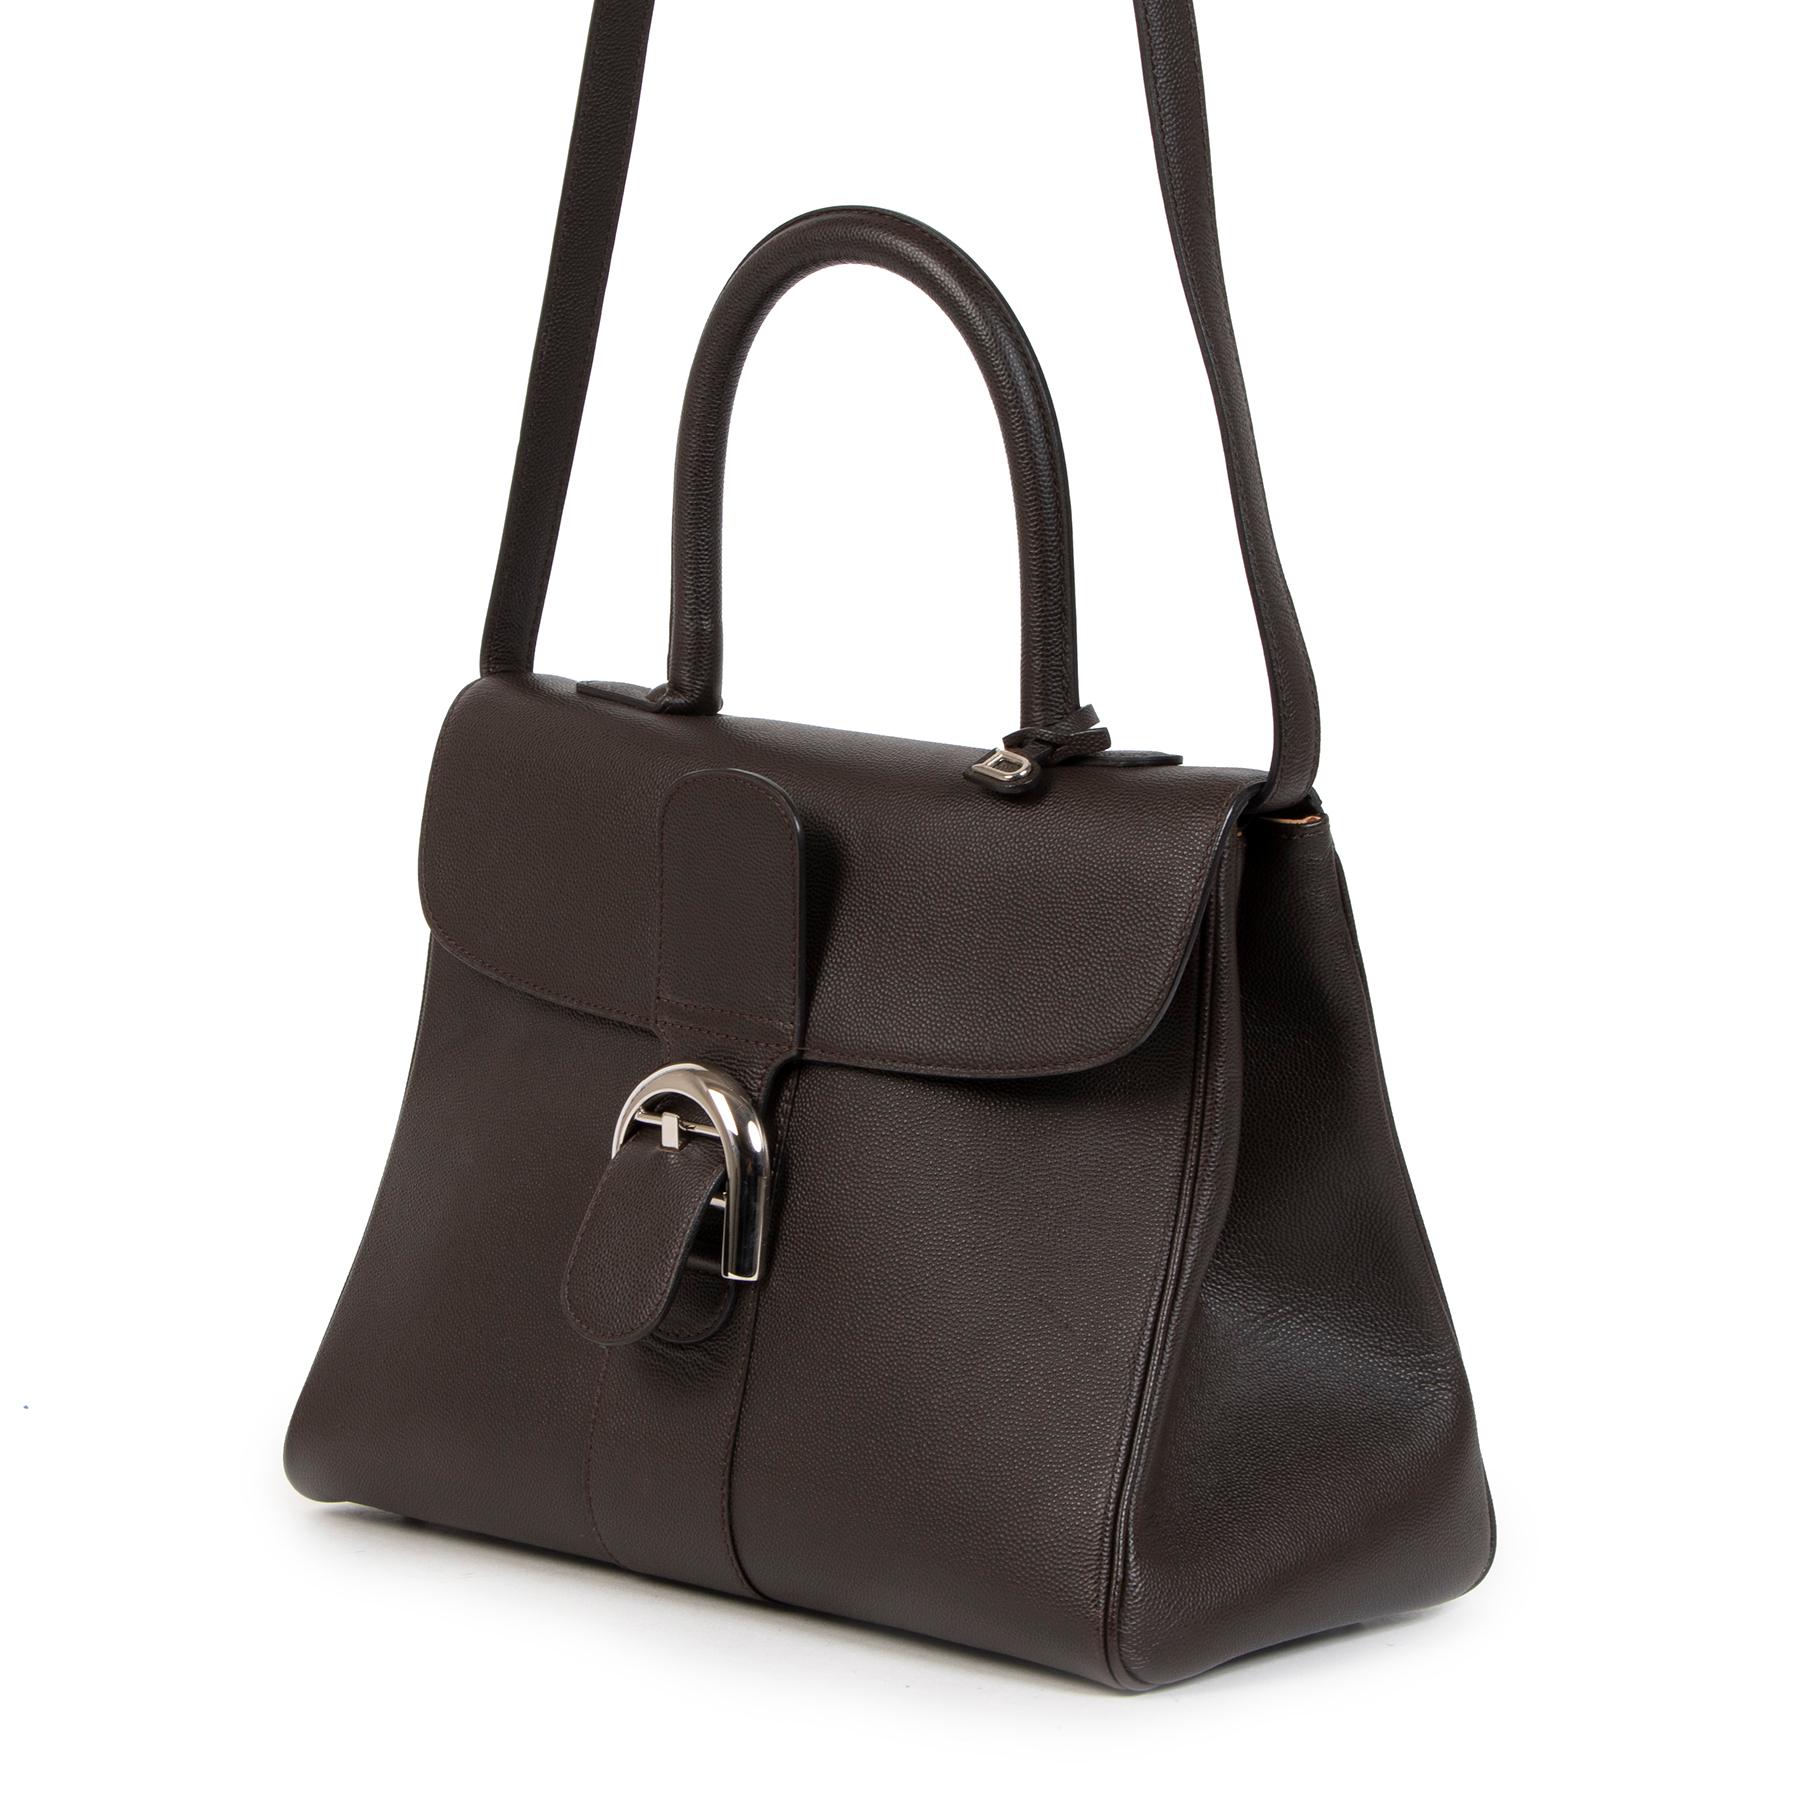 Excellent preloved condition

Delvaux Brillant Dark Grey MM

Introducing this timeless classic by Delvaux, the Brillant. Expertly crafted of dark grey, brown ebene leather and beautifully finished with iconic silver toned D buckle hardware. Wear